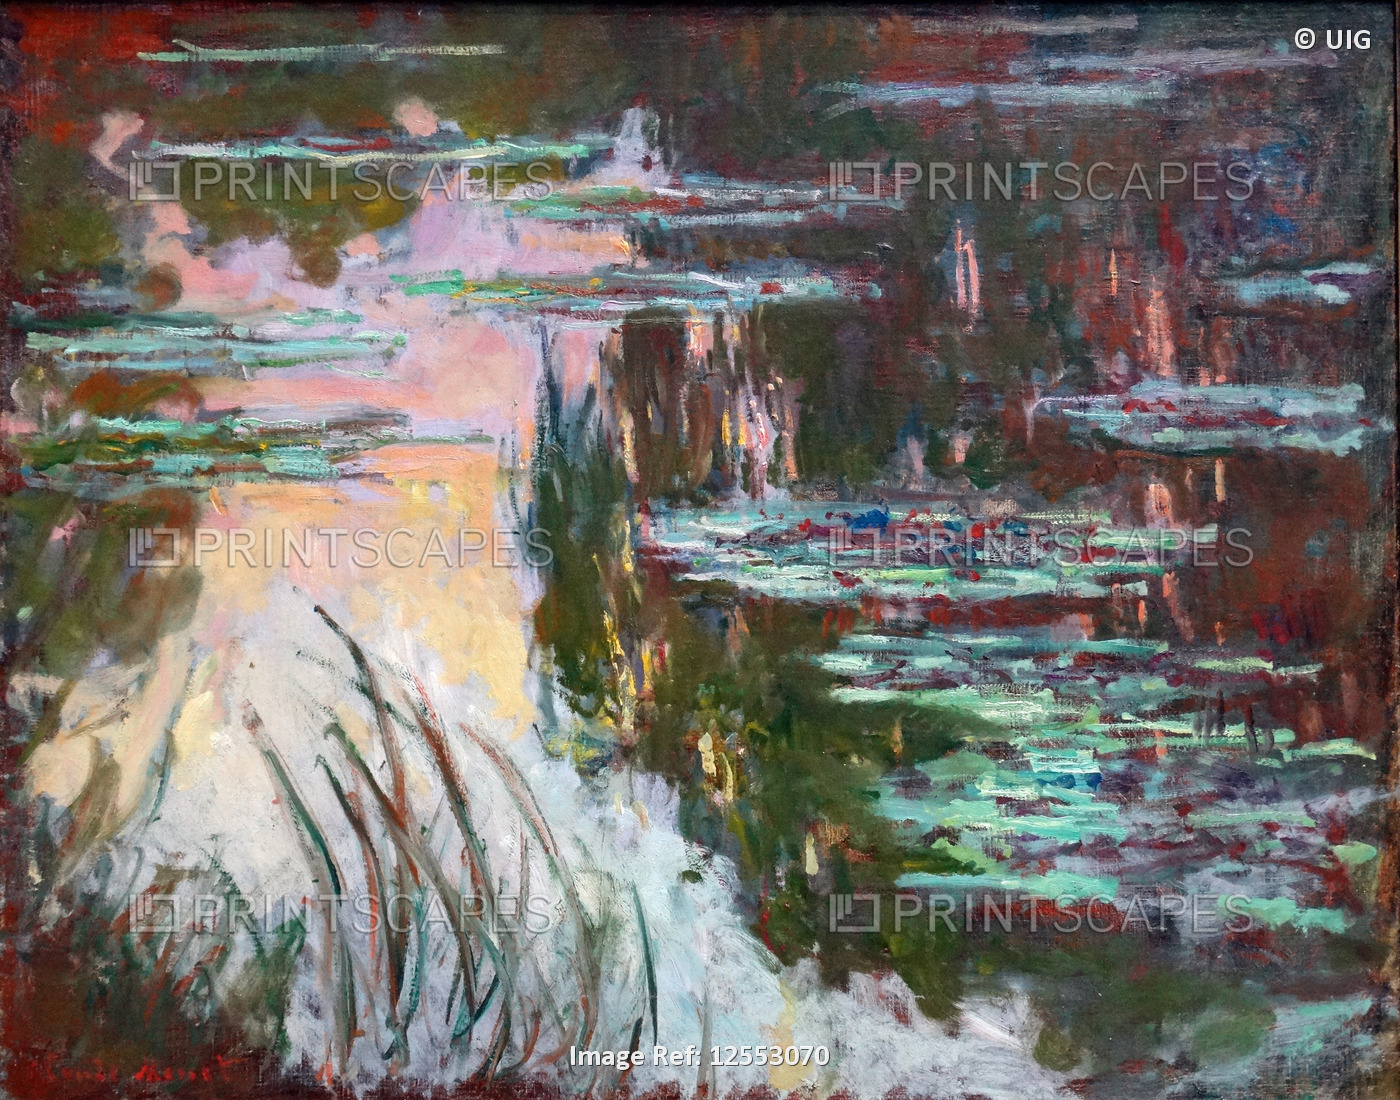 Painting titled 'Water Lilies, Setting Sun' by Claude Monet, dated 1907